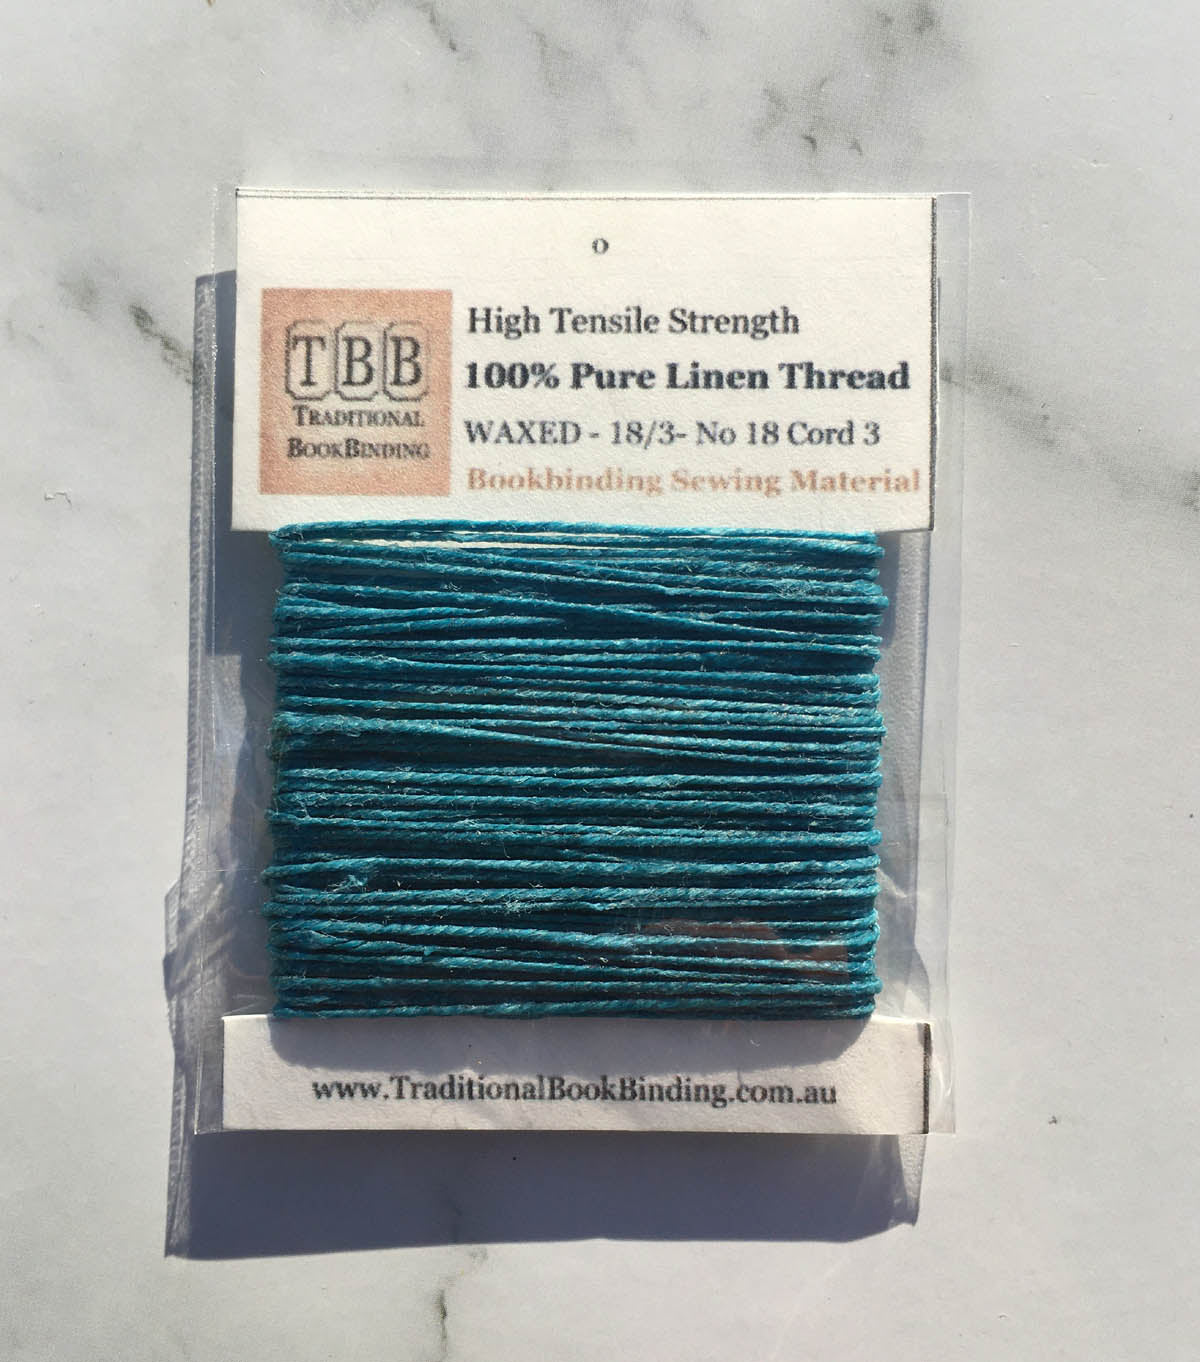 CERULEAN BLUE- 100% Pure Linen Thread- Waxed- 18/3 No.18 Cord 3- Approx 0.55mm thick